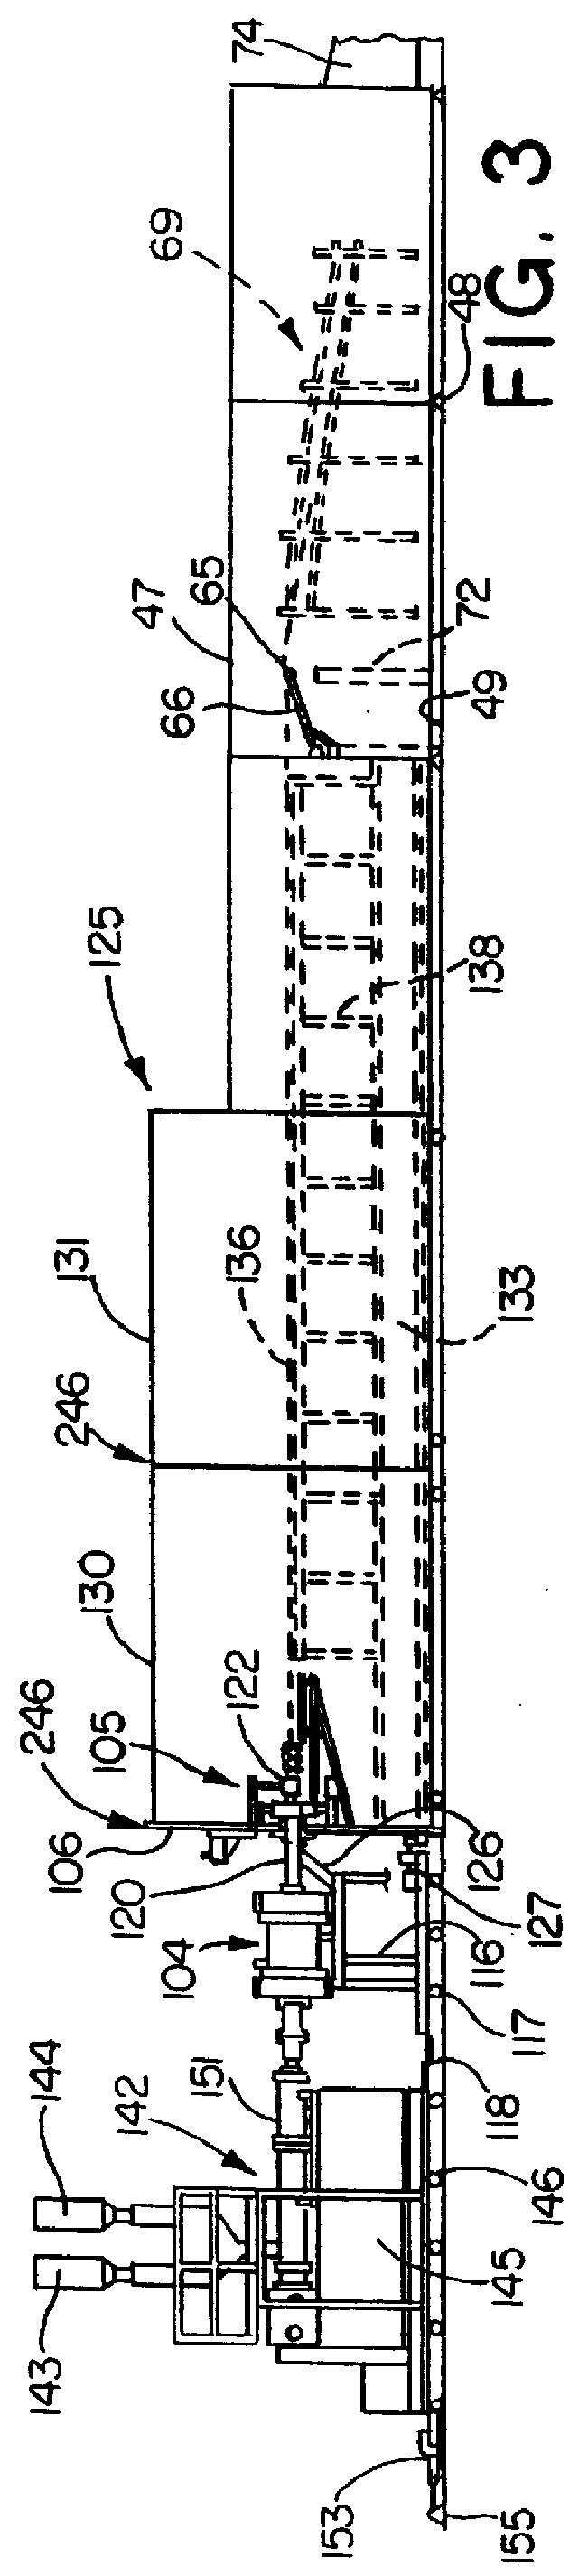 Sealable chamber extrusion apparatus with seal controls